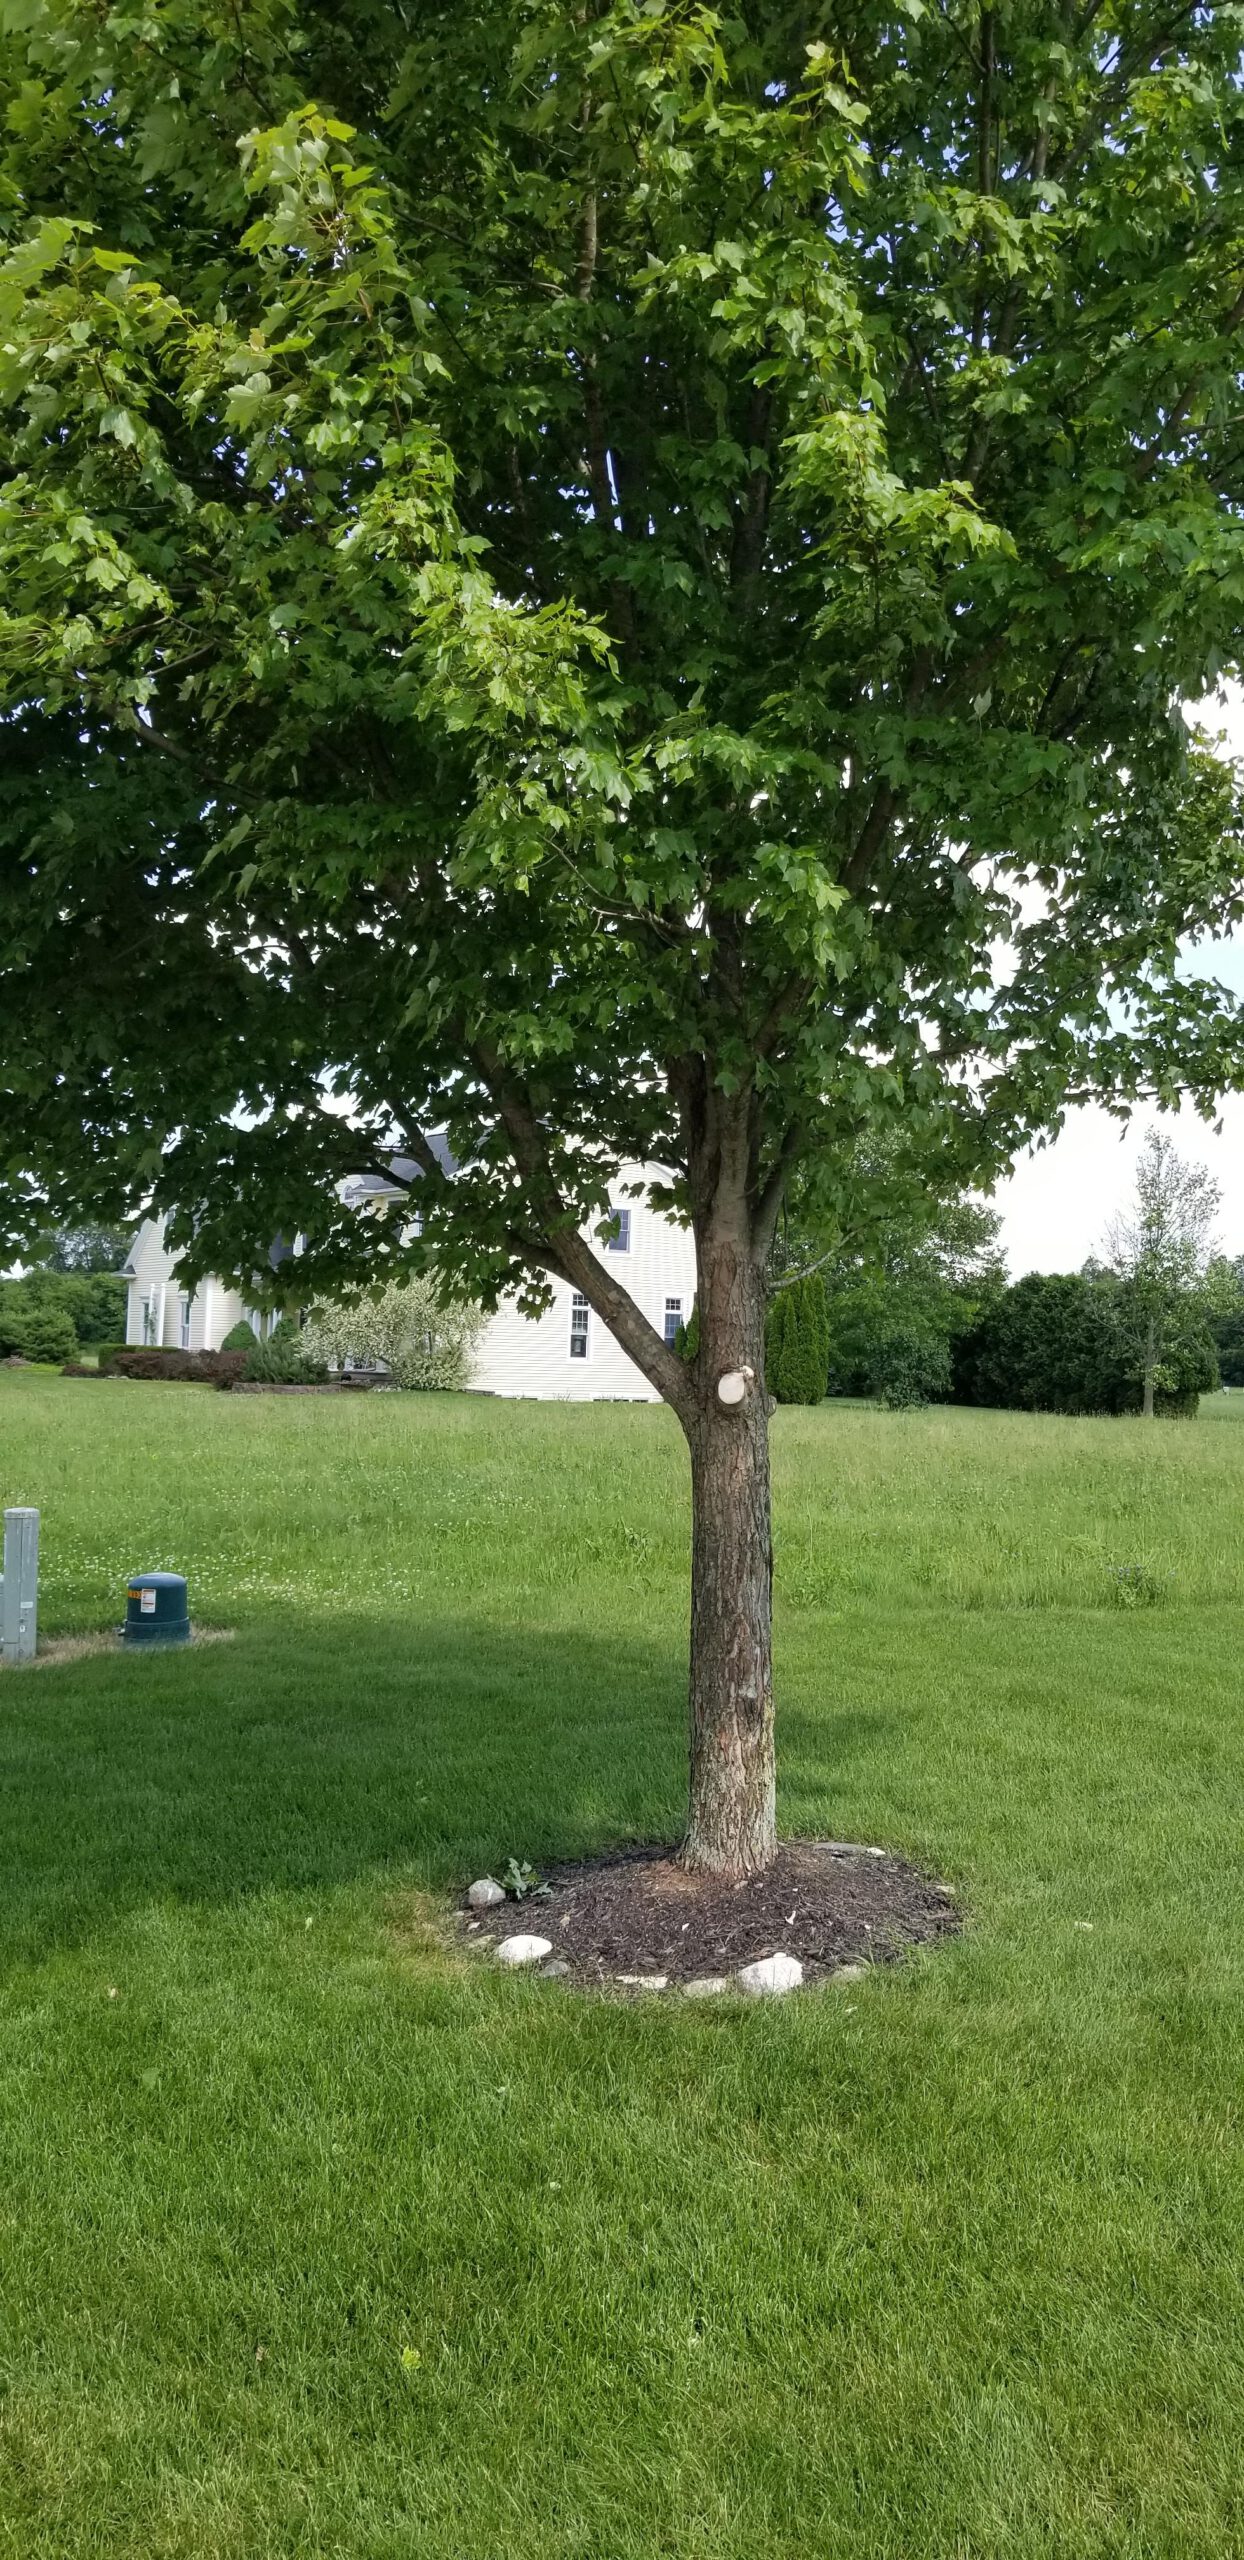 How Frequently Should I Trim My Trees?